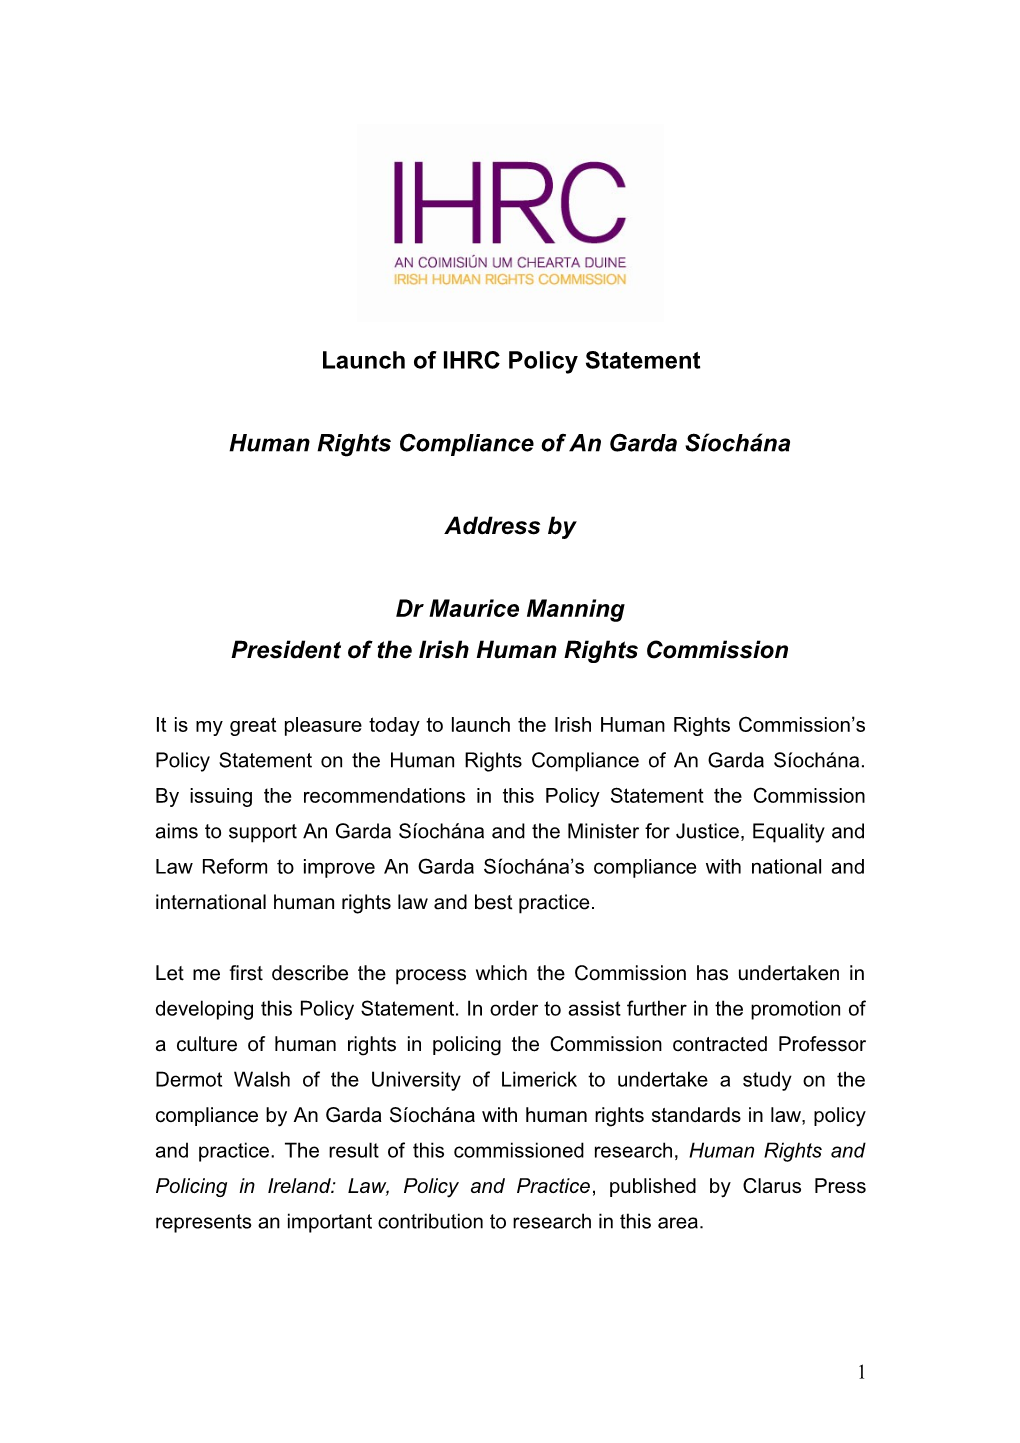 Speech by President Maurice Manning for the Launch of IHRC S Policy Statement on Human